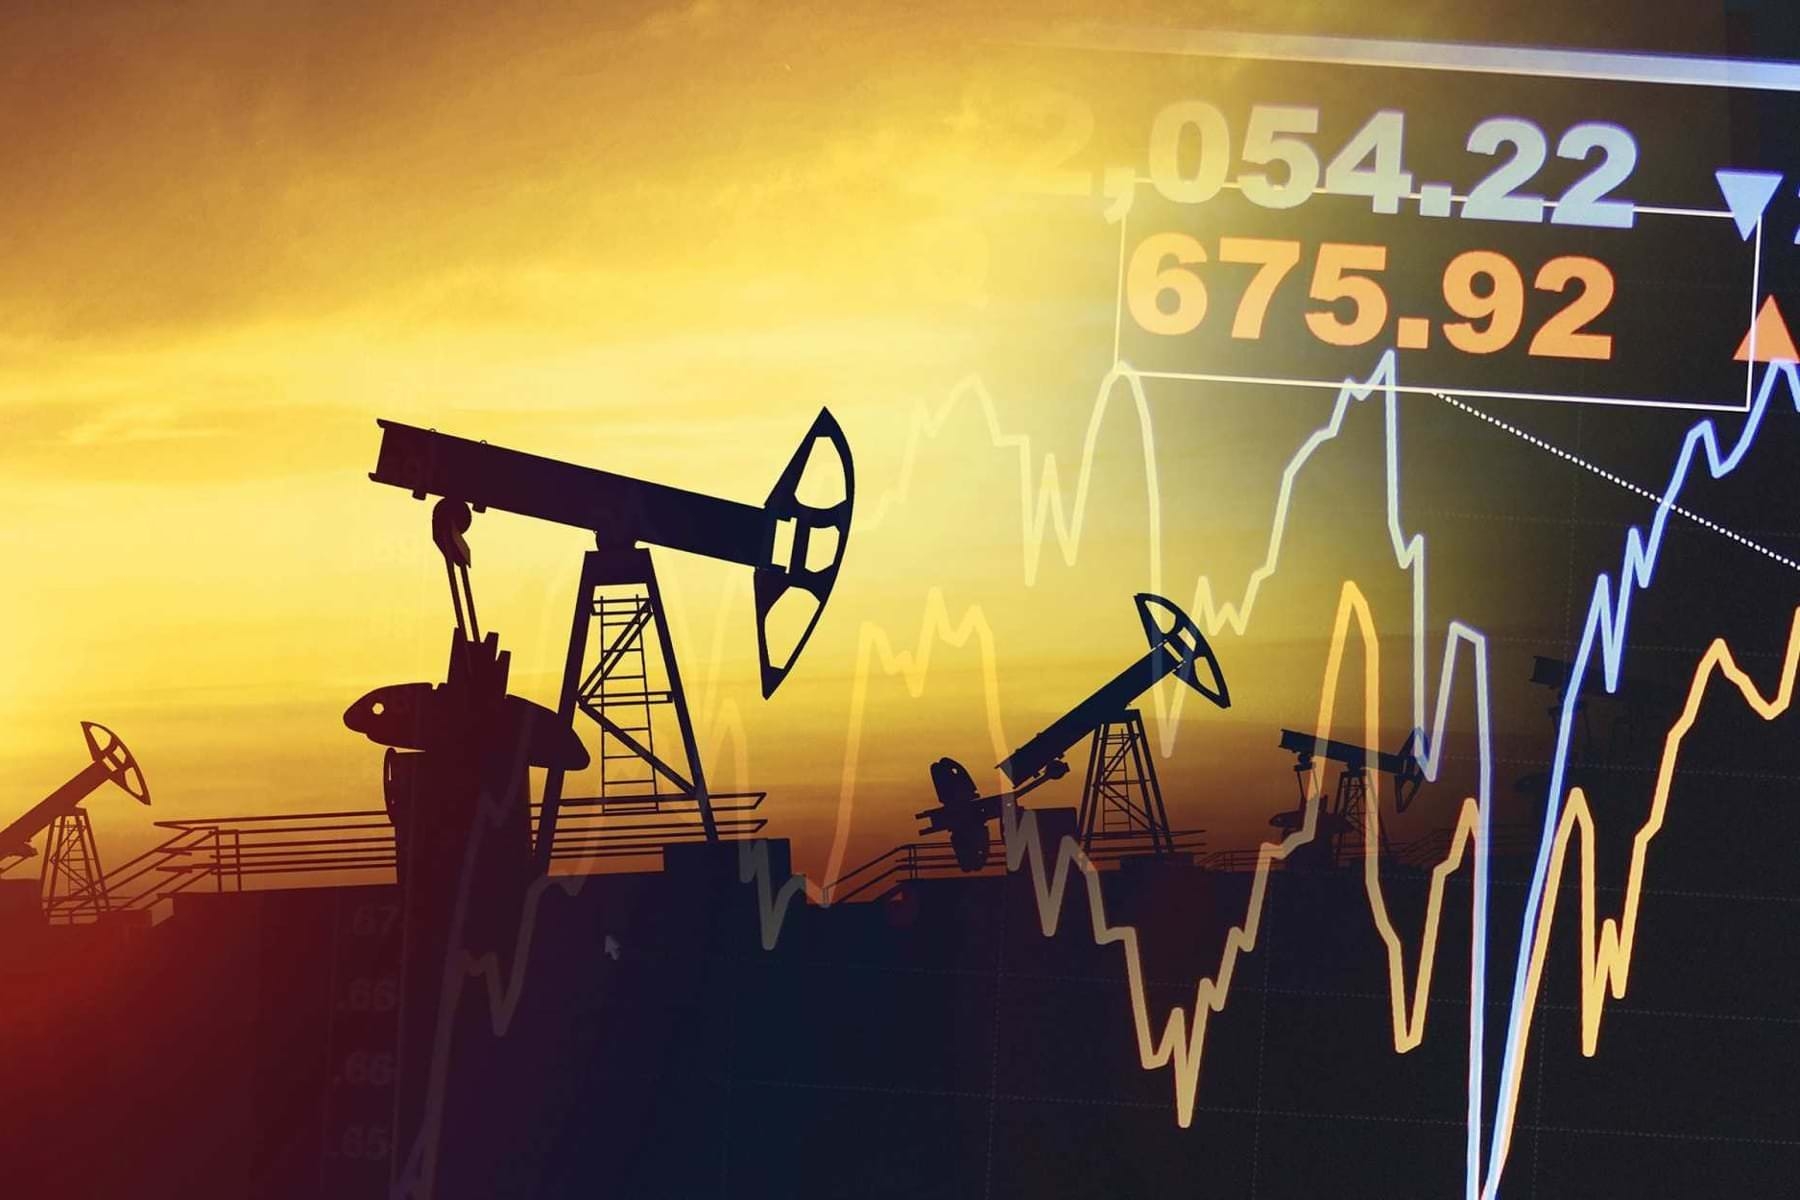 Oil prices remain steady amid declining demand forecasts, despite declining US inventories